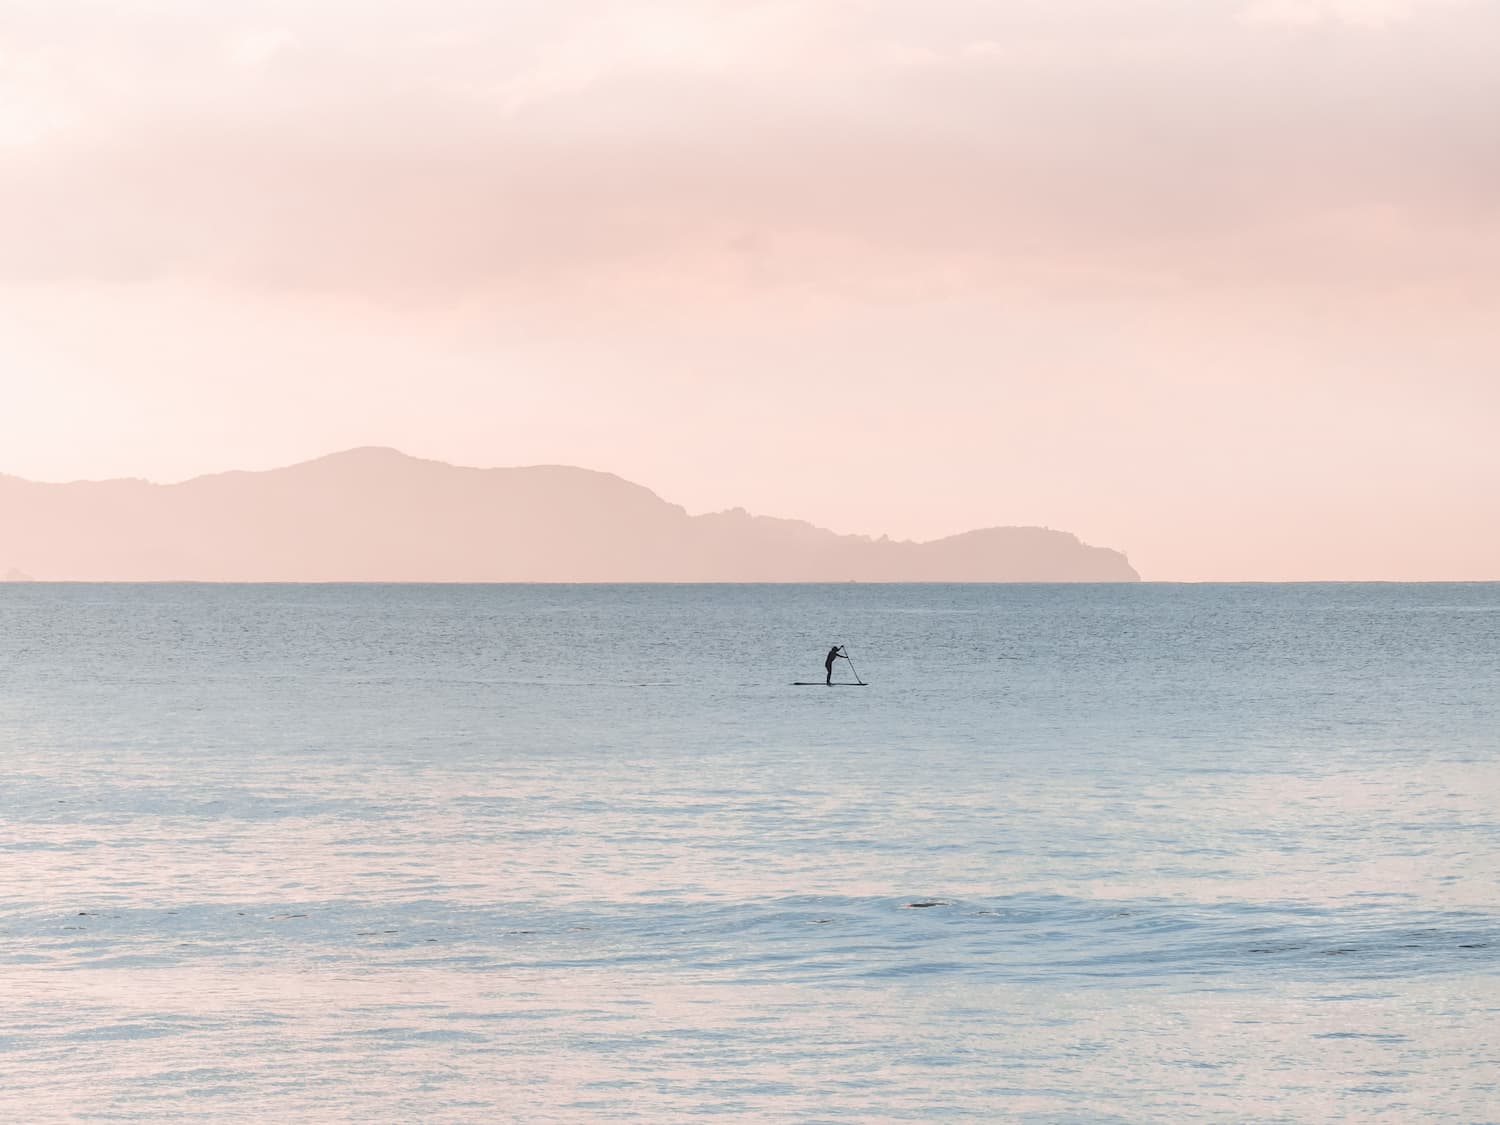 Simple, calm, paddle boarding